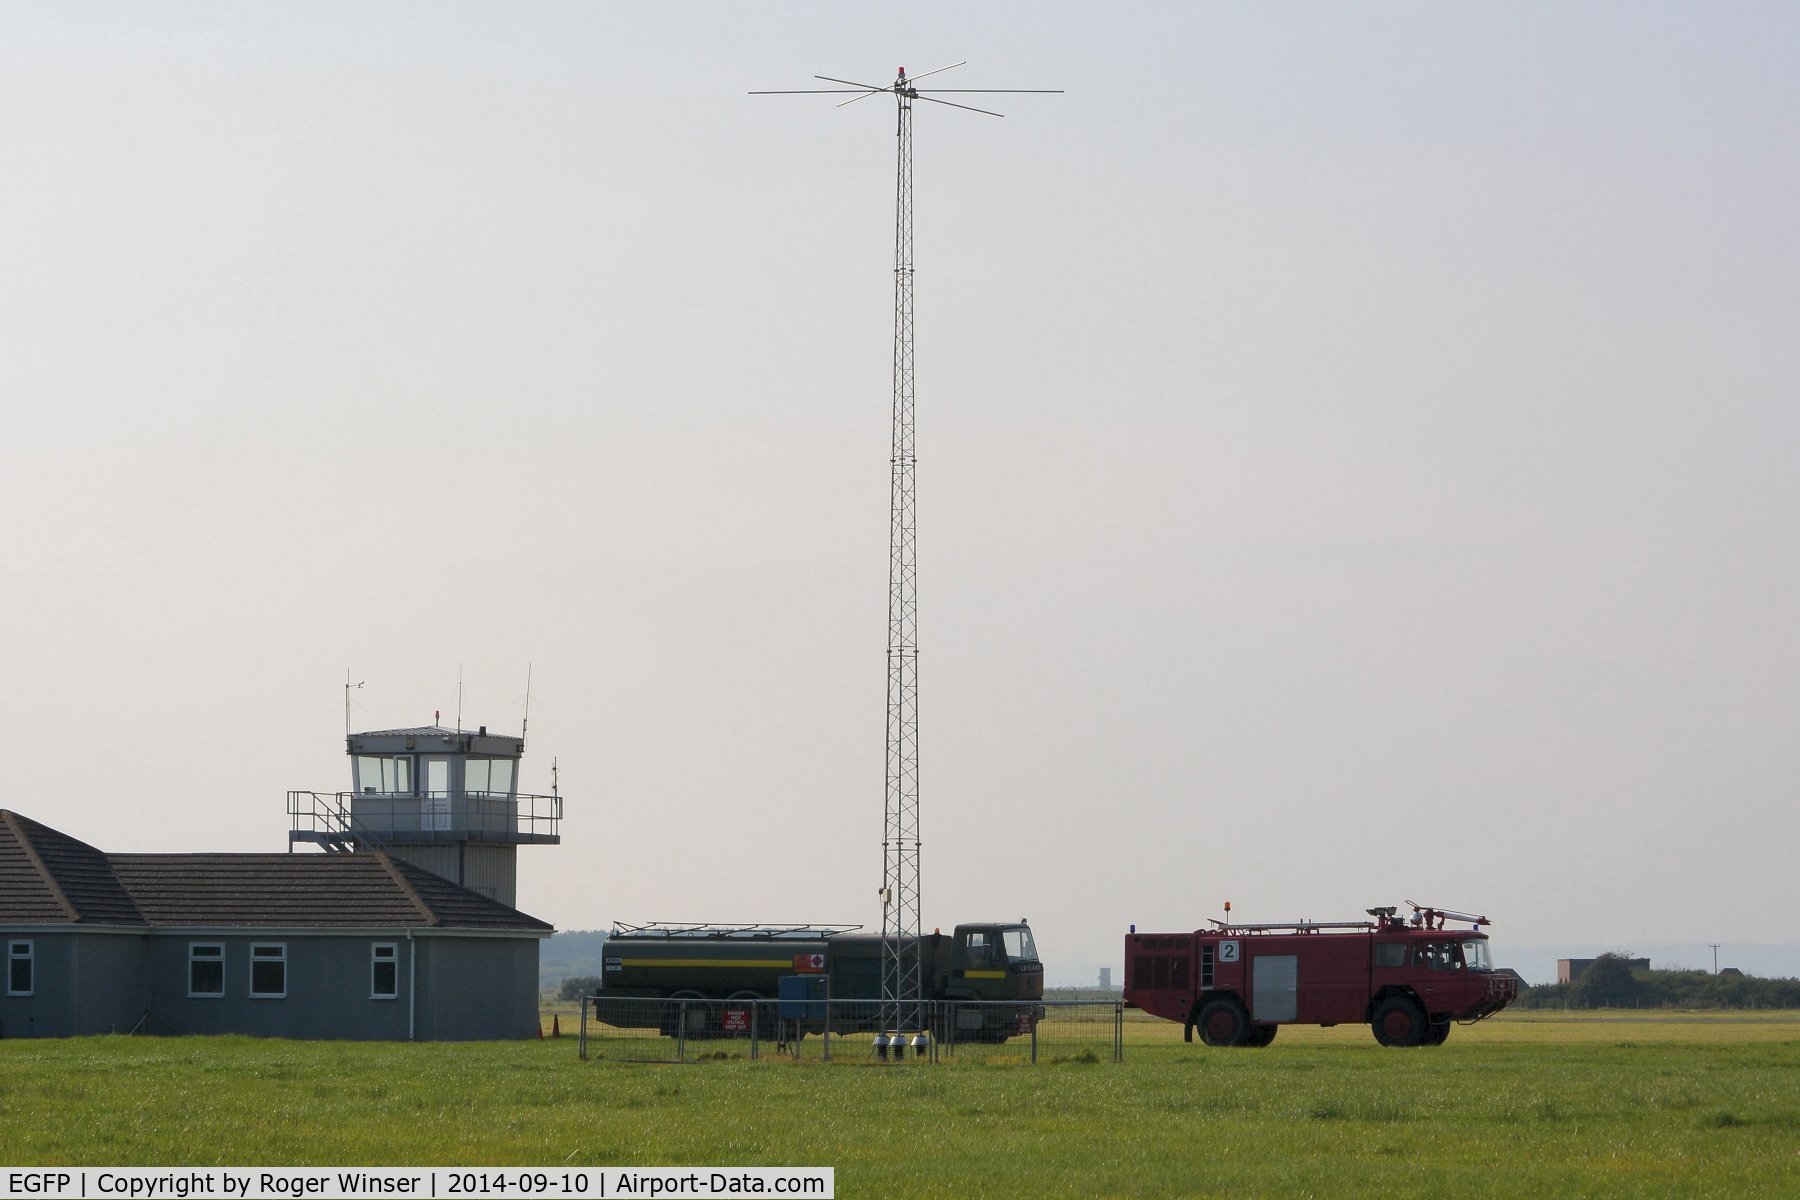 Pembrey Airport, Pembrey, Wales United Kingdom (EGFP) - Control Tower, fuel tender, radio mast and the airport Fire and Rescue tender #2. In the distance (between the two vehicles) can be see an observation tower on the adjacent DIO Pembrey Sands Air Weapons Range (EGOP). 